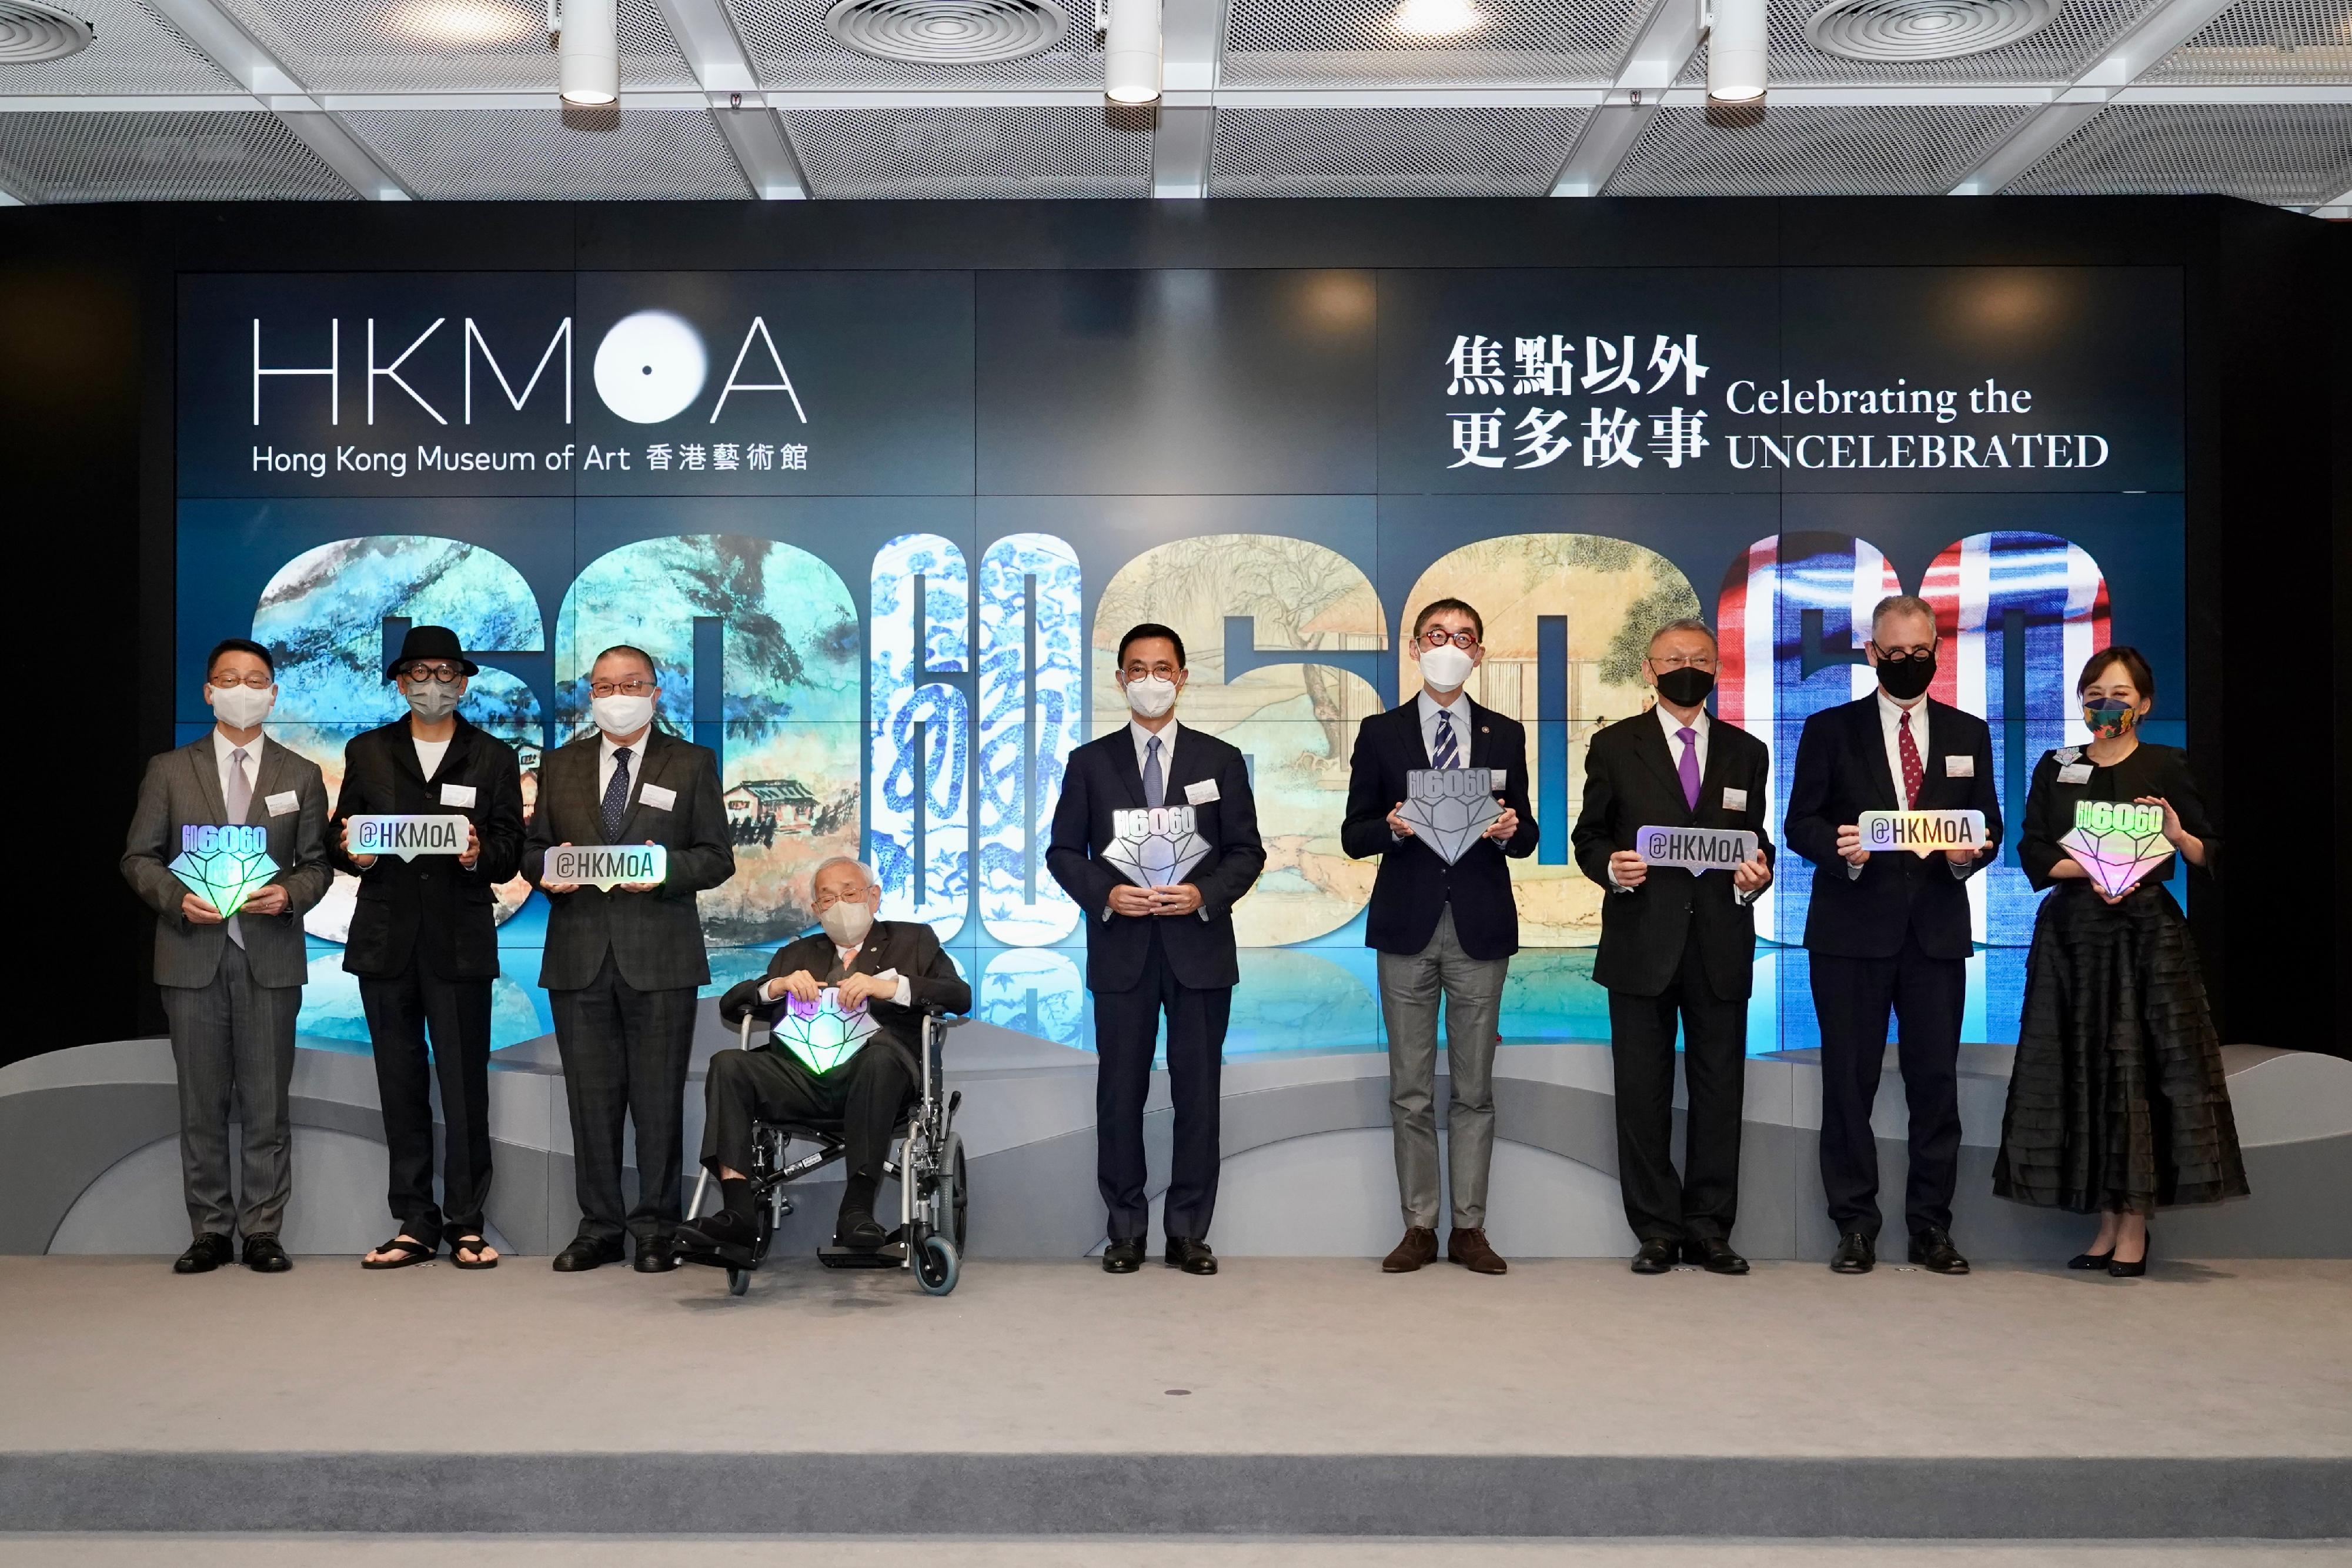 The Inauguration of Jingguanlou Gallery cum Celebration Ceremony of the HKMoA (Hong Kong Museum of Art) 60th Anniversary was held today (December 8). Photo shows (from left) the Director of Leisure and Cultural Services, Mr Vincent Liu; donor of artwork "Hong Kong Walk On/one" anothermountainman (Stanley Wong); the representative of Chih Lo Lou, Mr Ho Sai-yiu; the Founder of the Jingguanlou collection, Dr Leo Wong; the Secretary for Culture, Sports and Tourism, Mr Kevin Yeung; the Chairman of the Museum Advisory Committee, Mr Douglas So; the owner of the Huaihaitang collection, Mr Anthony Cheung; the Chief Executive Officer of Tai Ping Carpets Limited and donor of "Hong Kong Walk On/one" Mr Mark Worgan; and the Museum Director of the HKMoA, Dr Maria Mok, at the event.